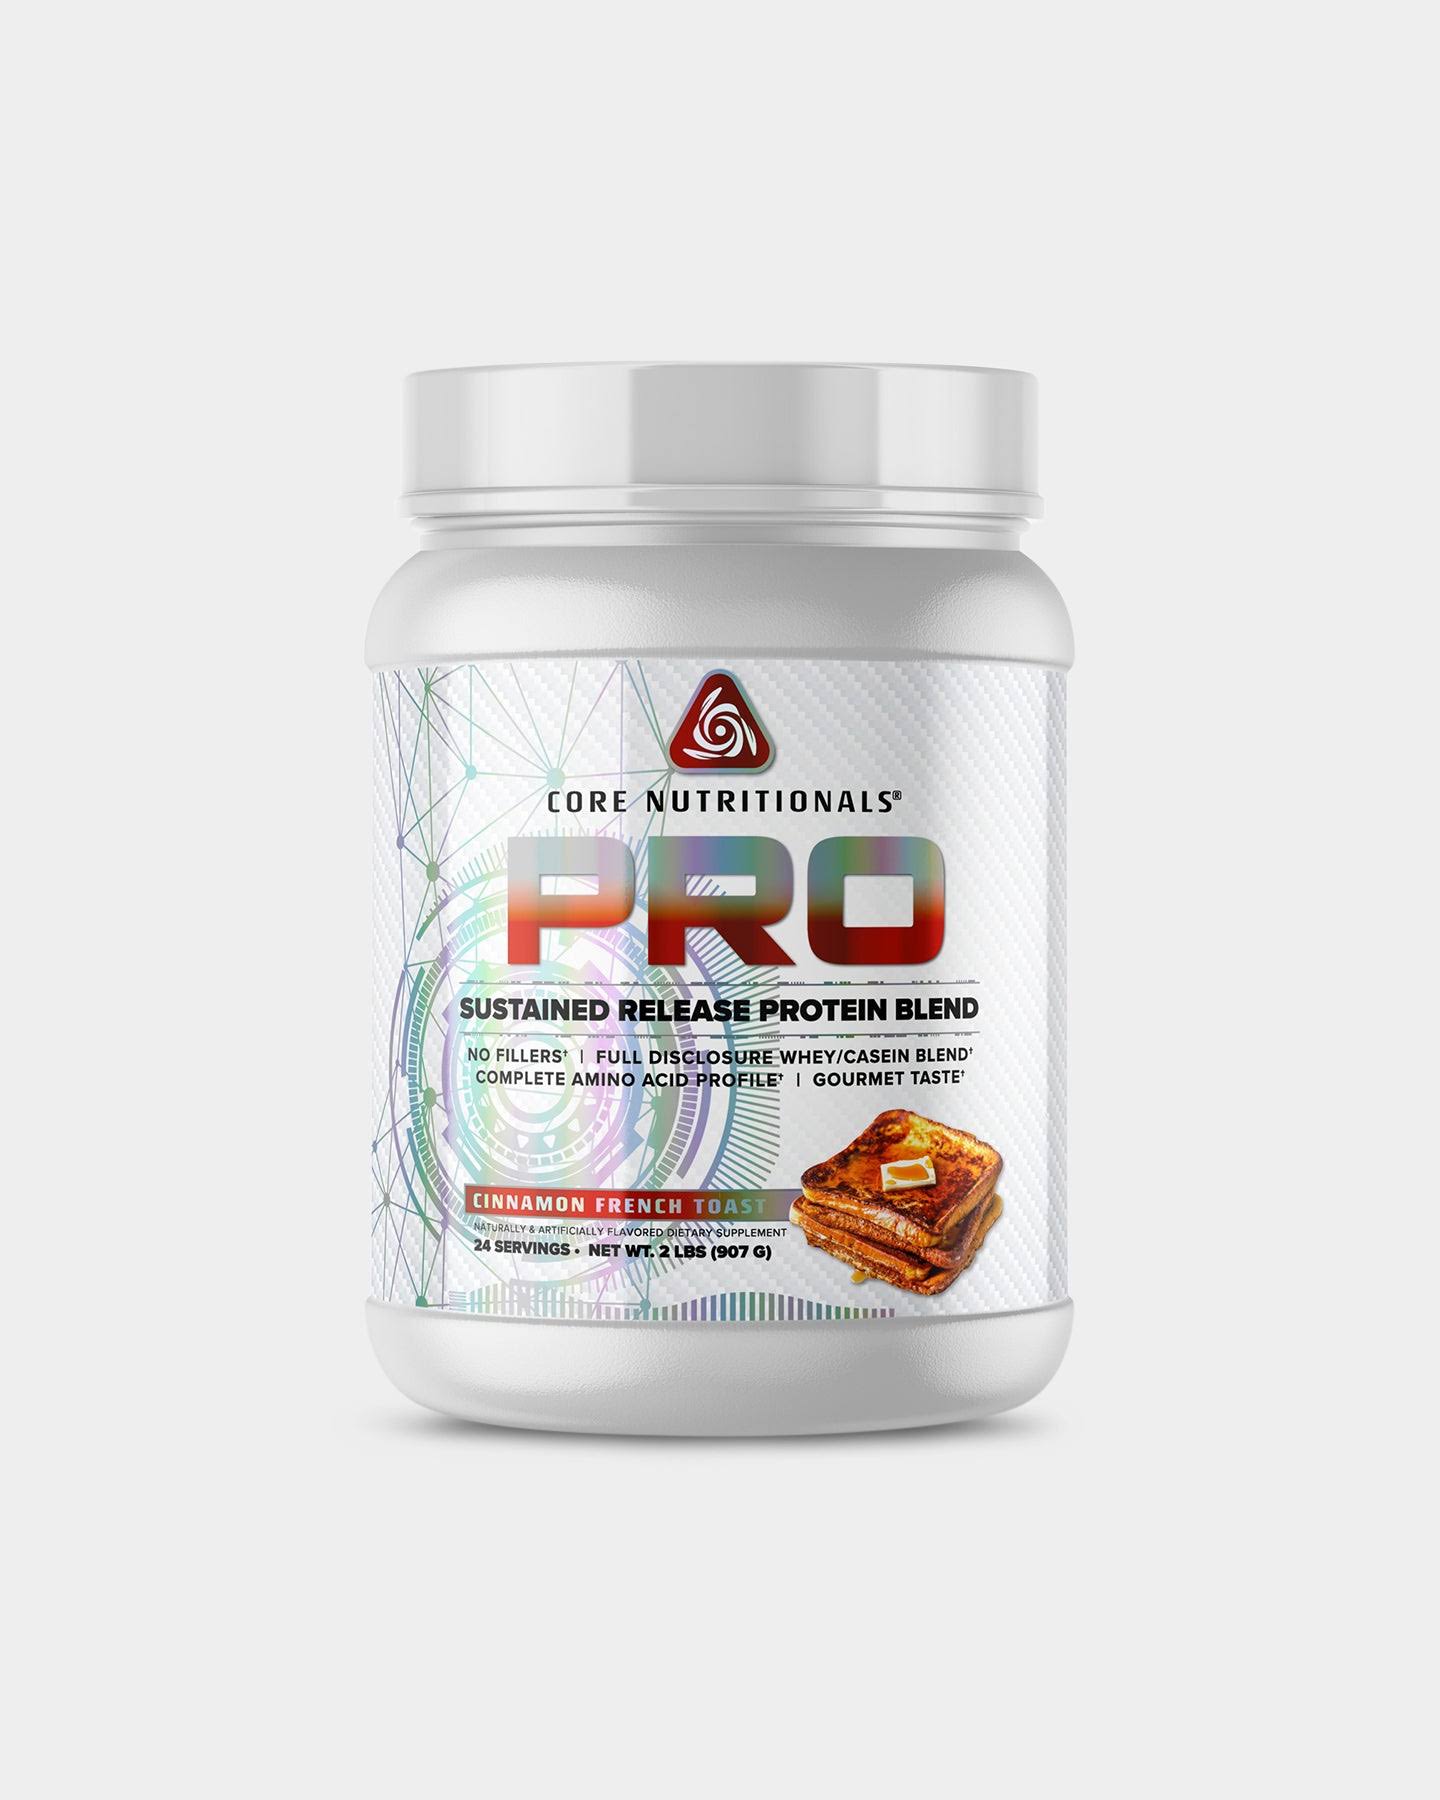 Core Nutritionals Core PRO Protein Blend in Cinnamon French Toast | 907 Grams